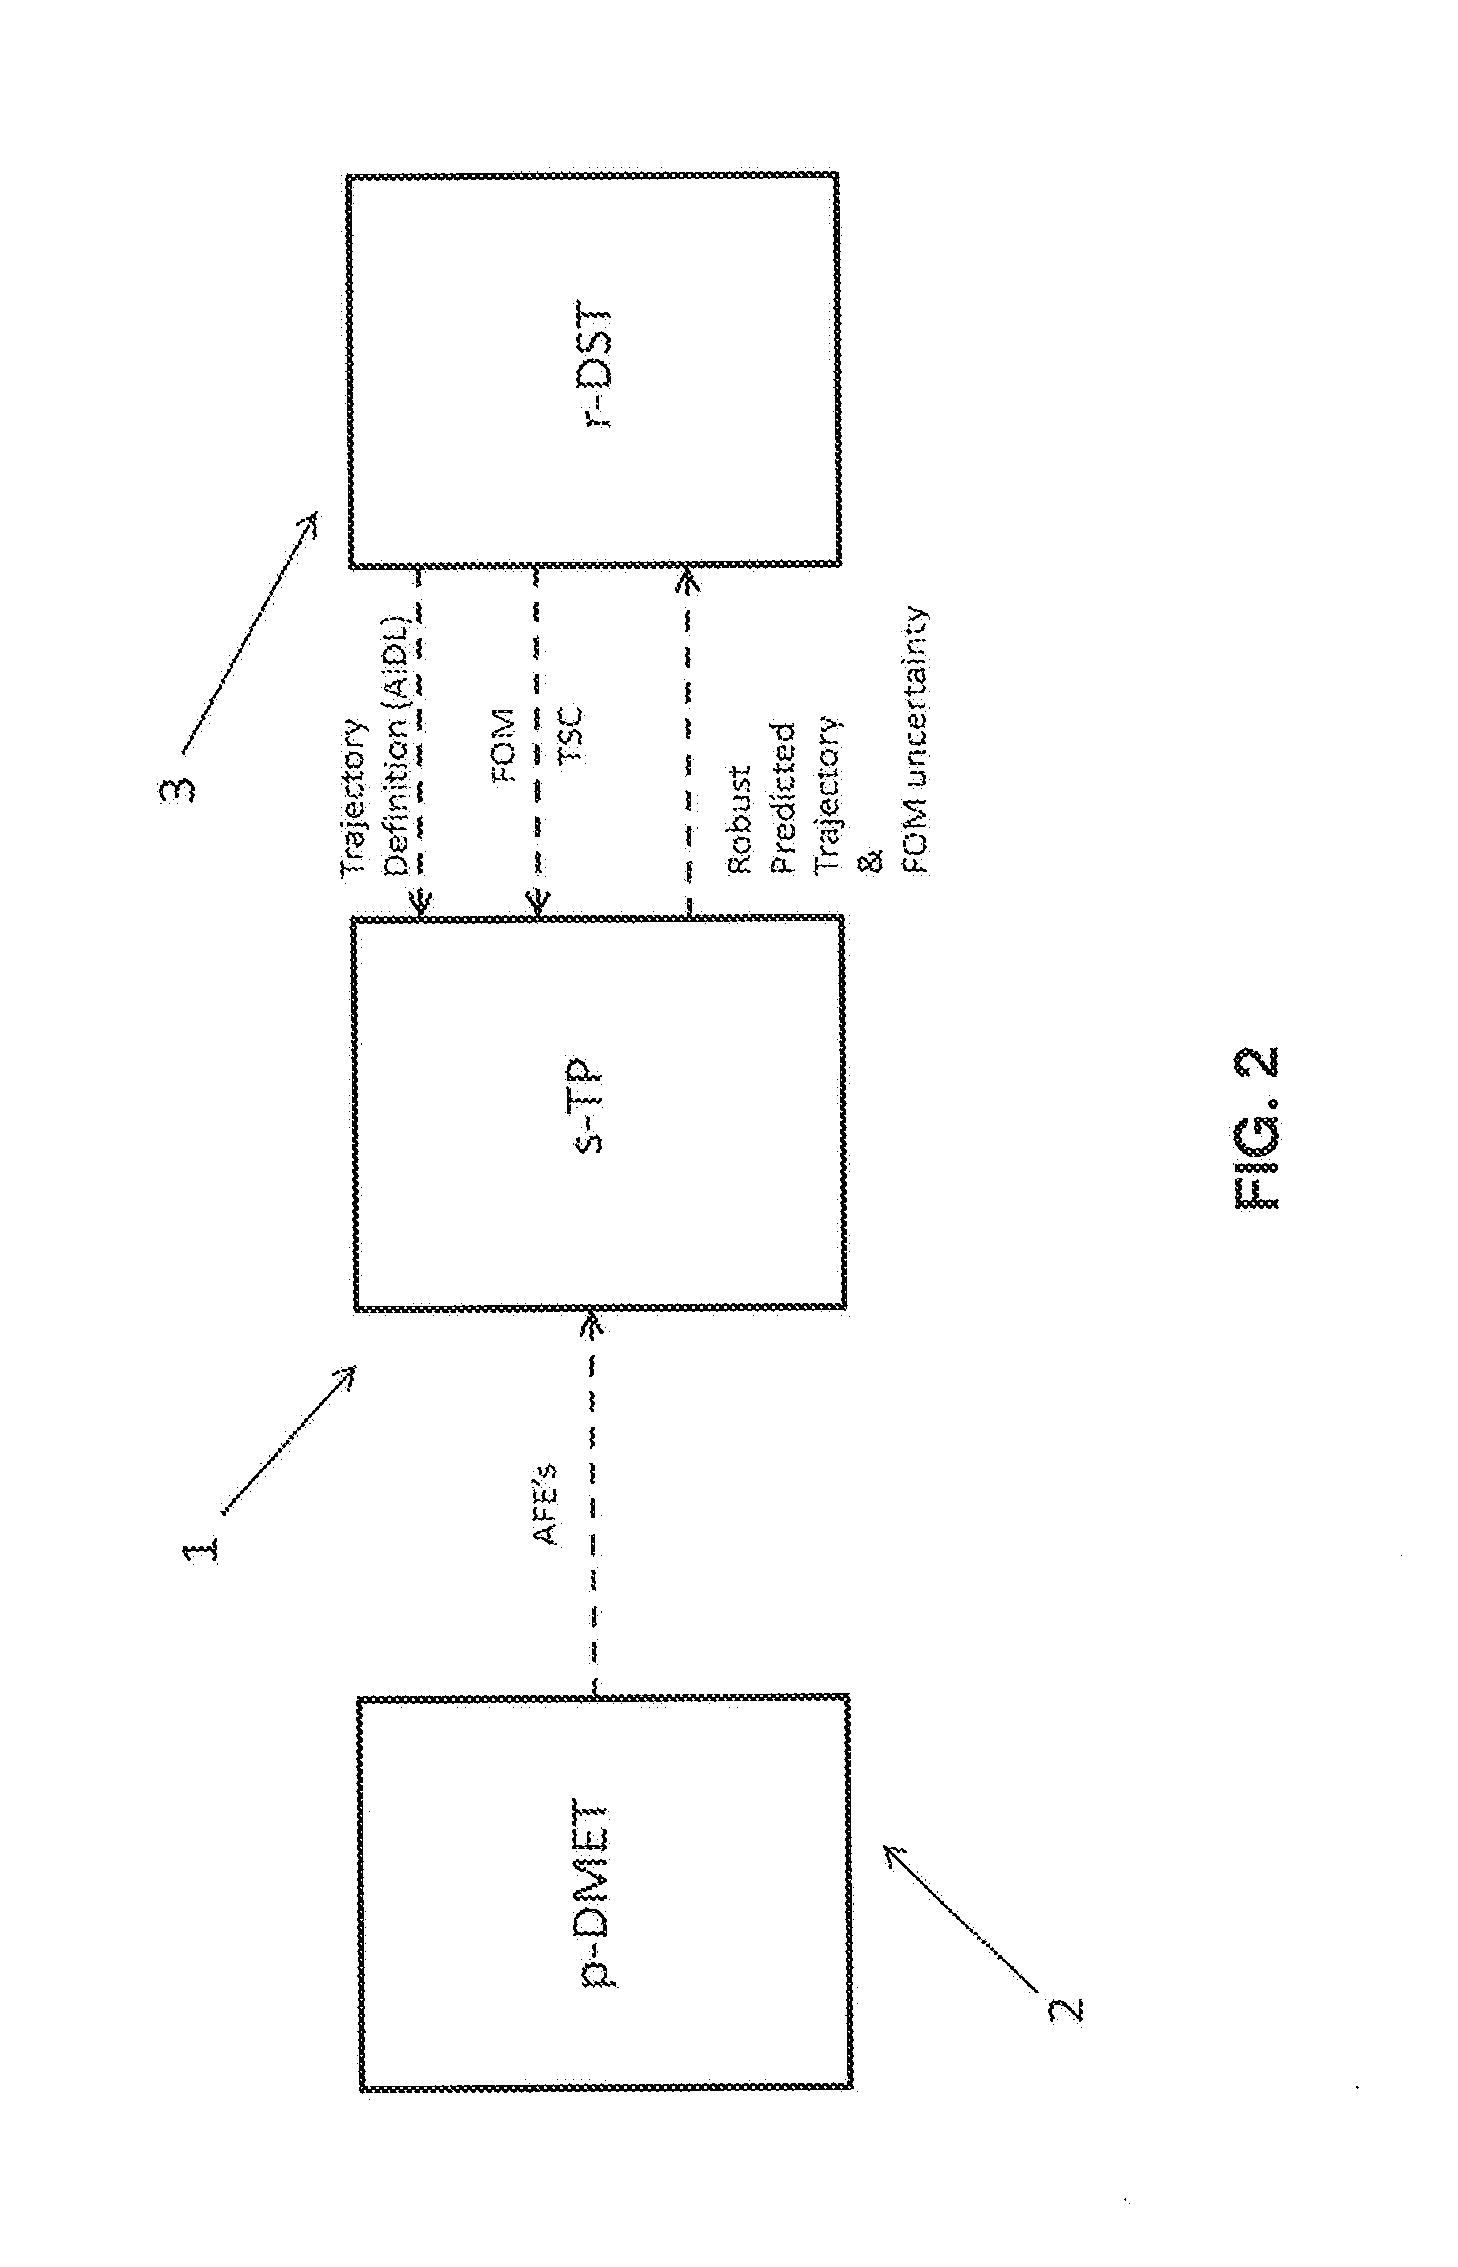 System and Method for Defining and Predicting Aircraft Trajectories